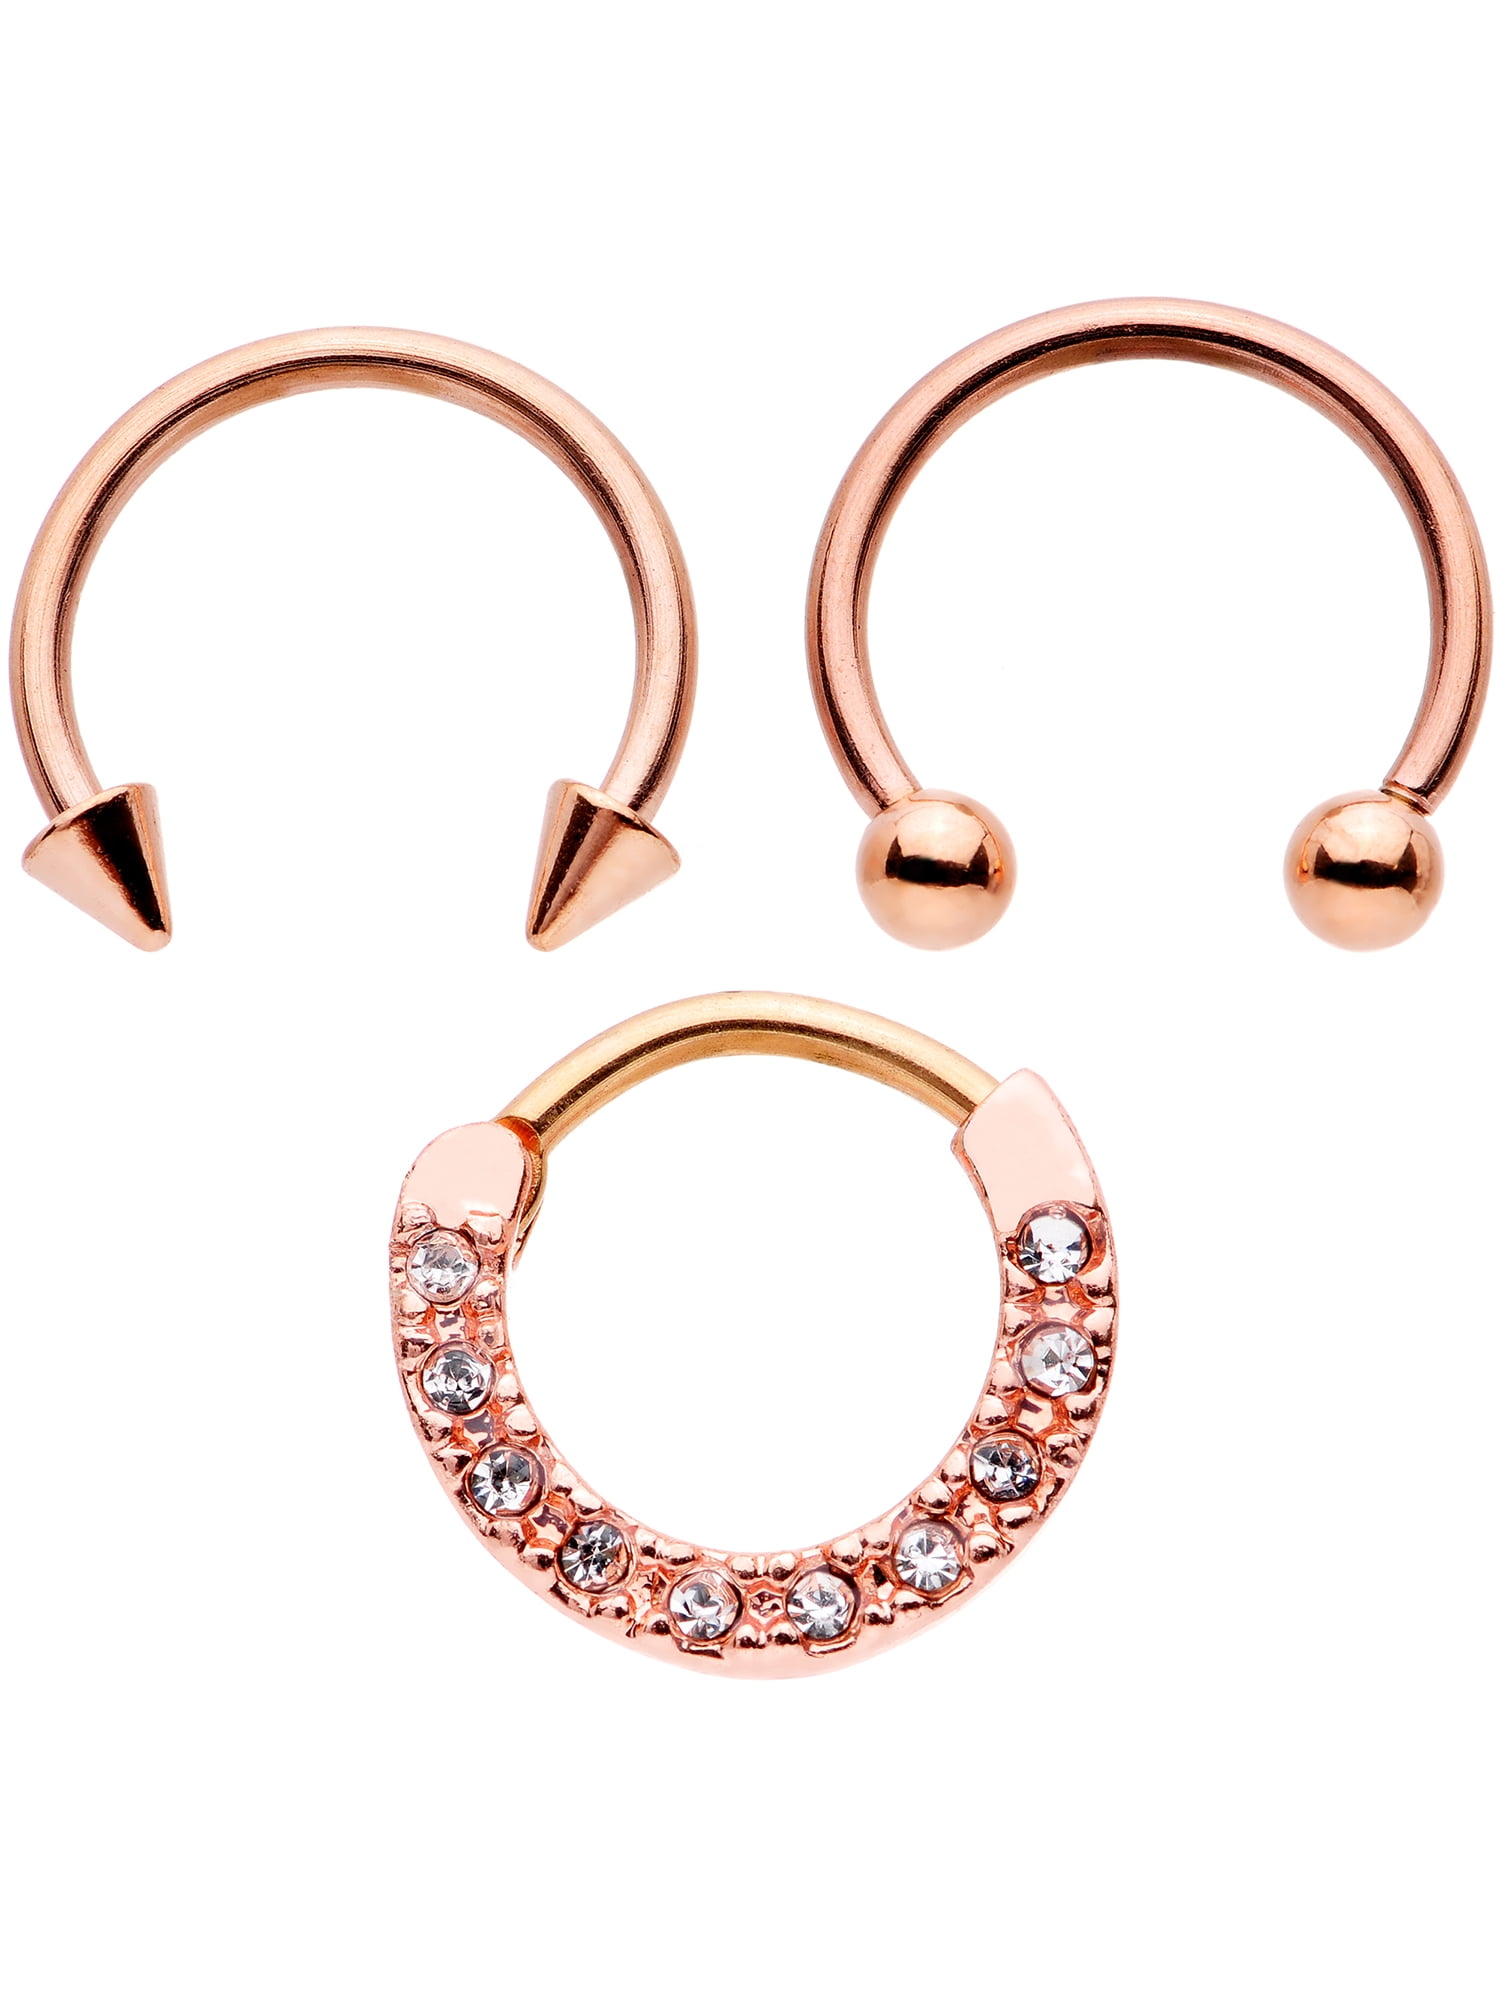 Body Candy 16G 3PC Steel Septum Clicker 10mm Horseshoe Spike Clear Accent  Septum Hoop Nose Ring Hoops 3/8